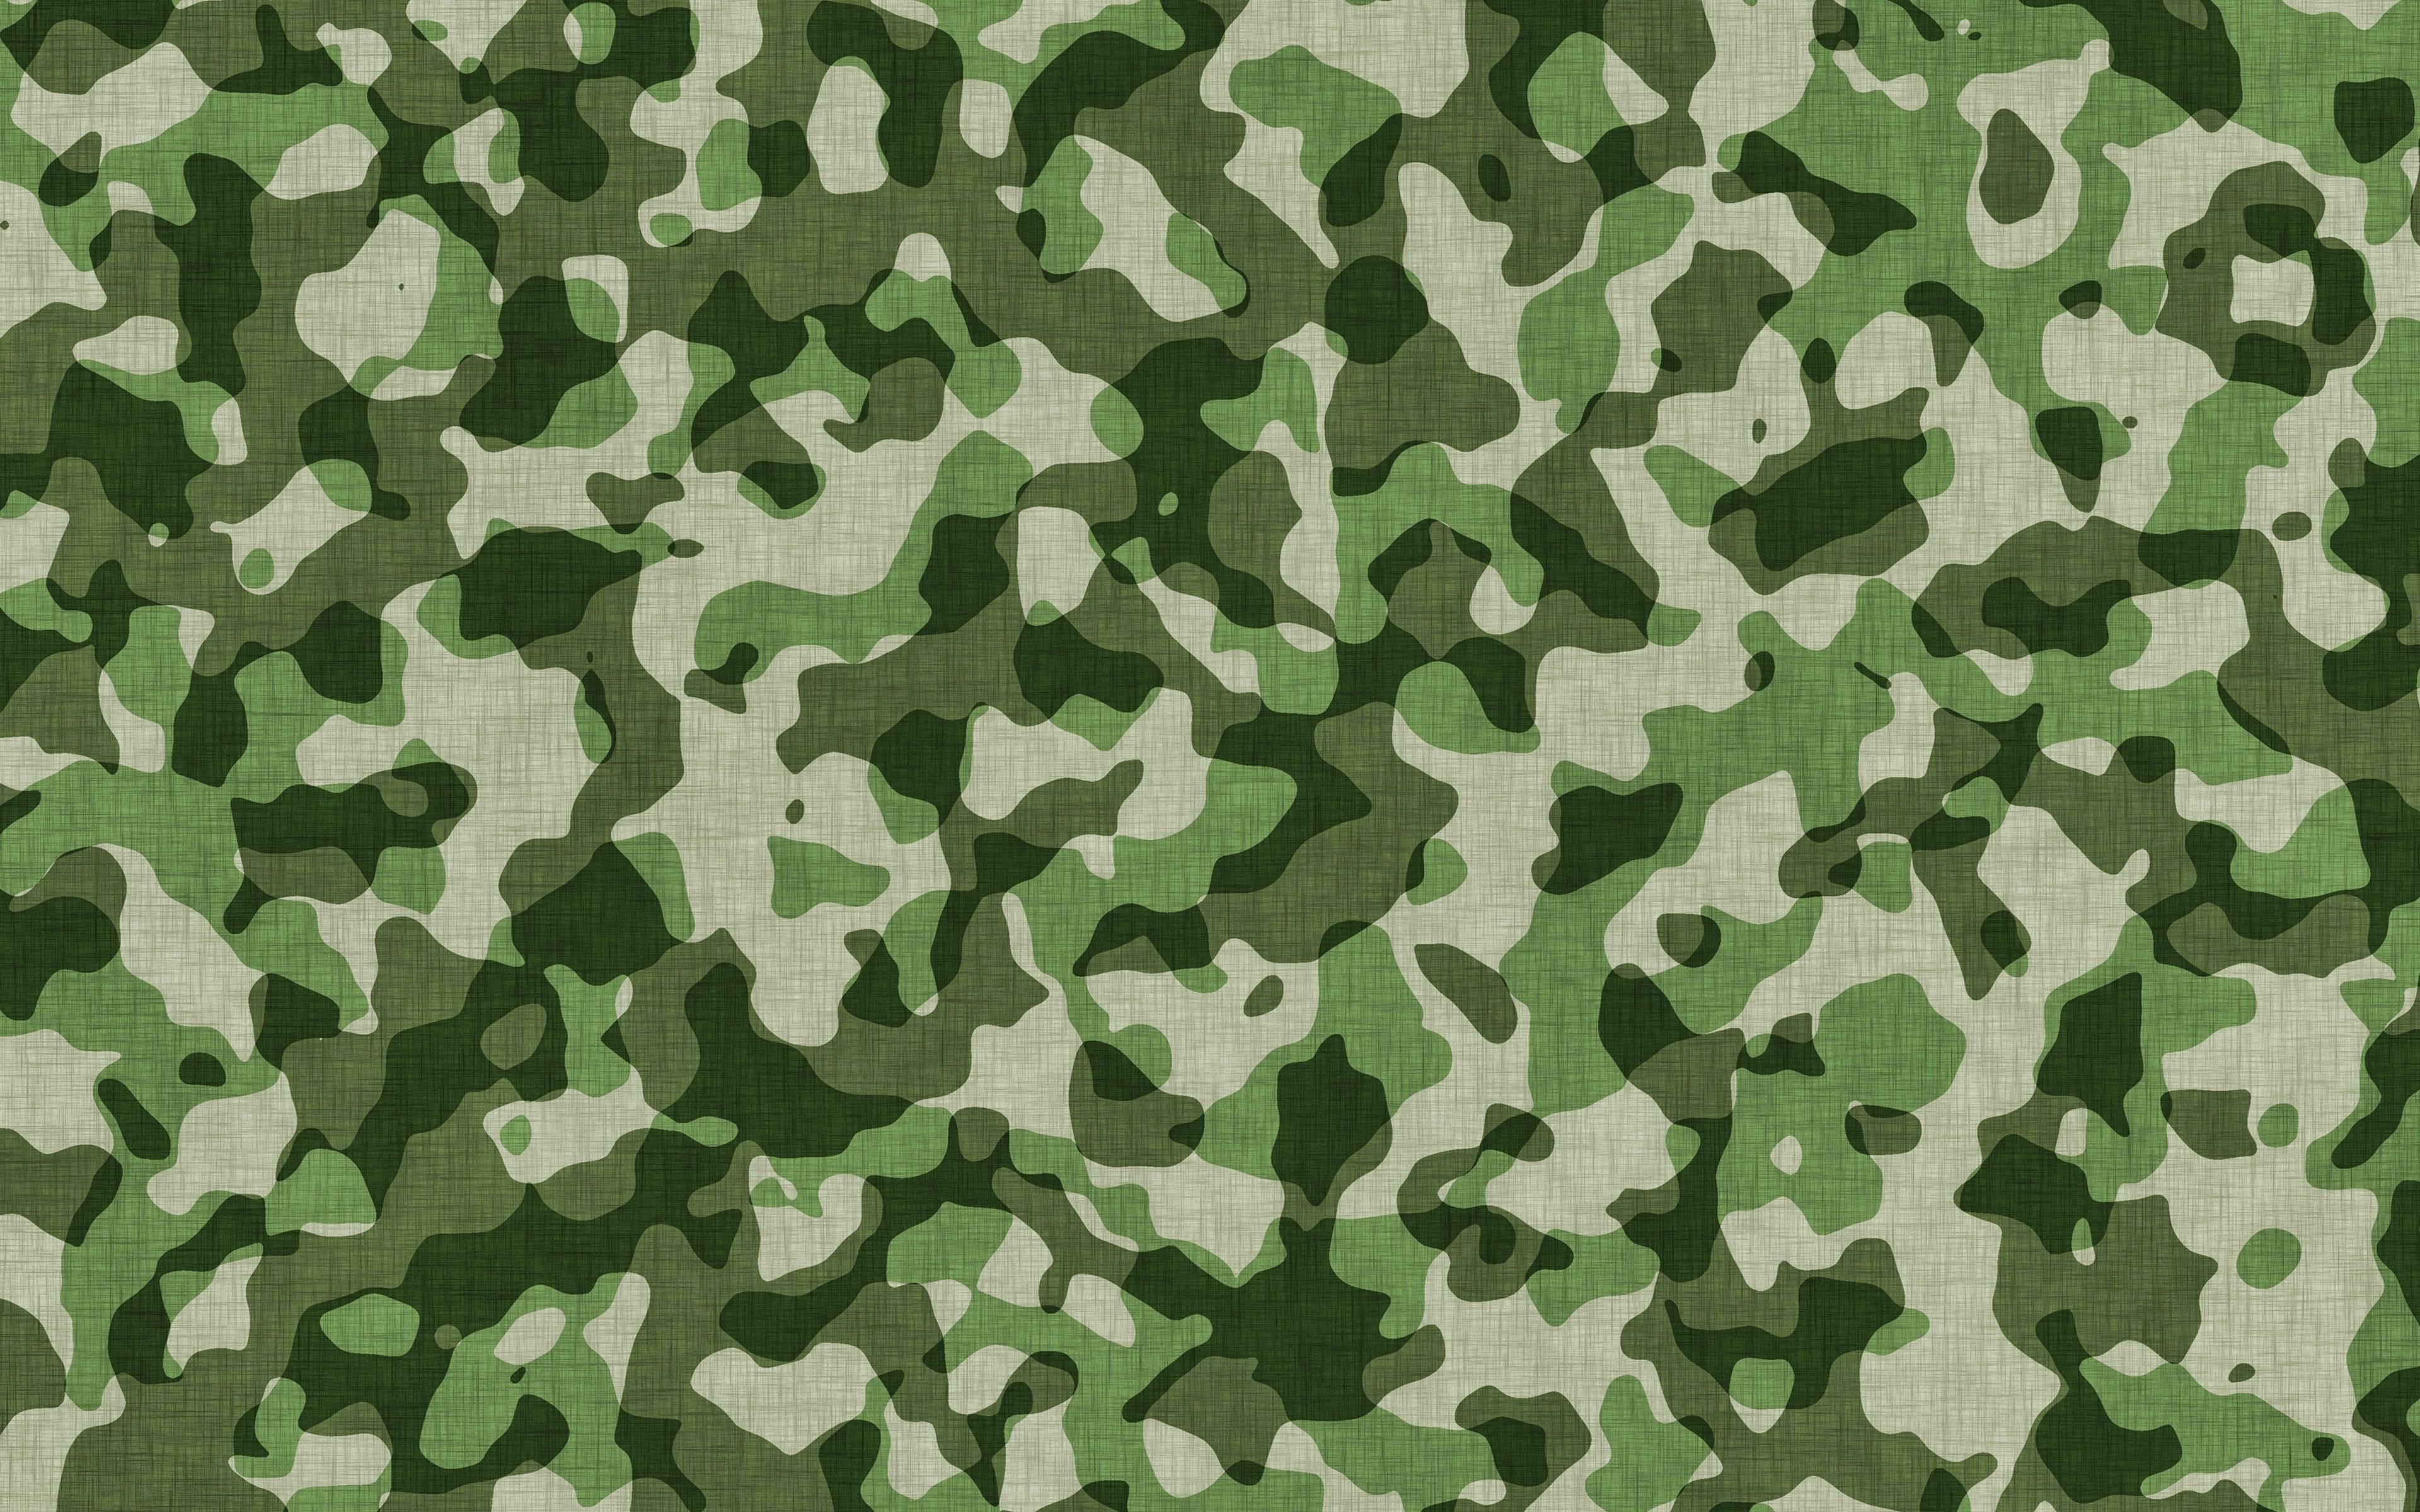 Download wallpaper green camouflage, 4k, camouflage pattern, military camouflage, green background, grass camouflage for desktop with resolution 3840x2400. High Quality HD picture wallpaper